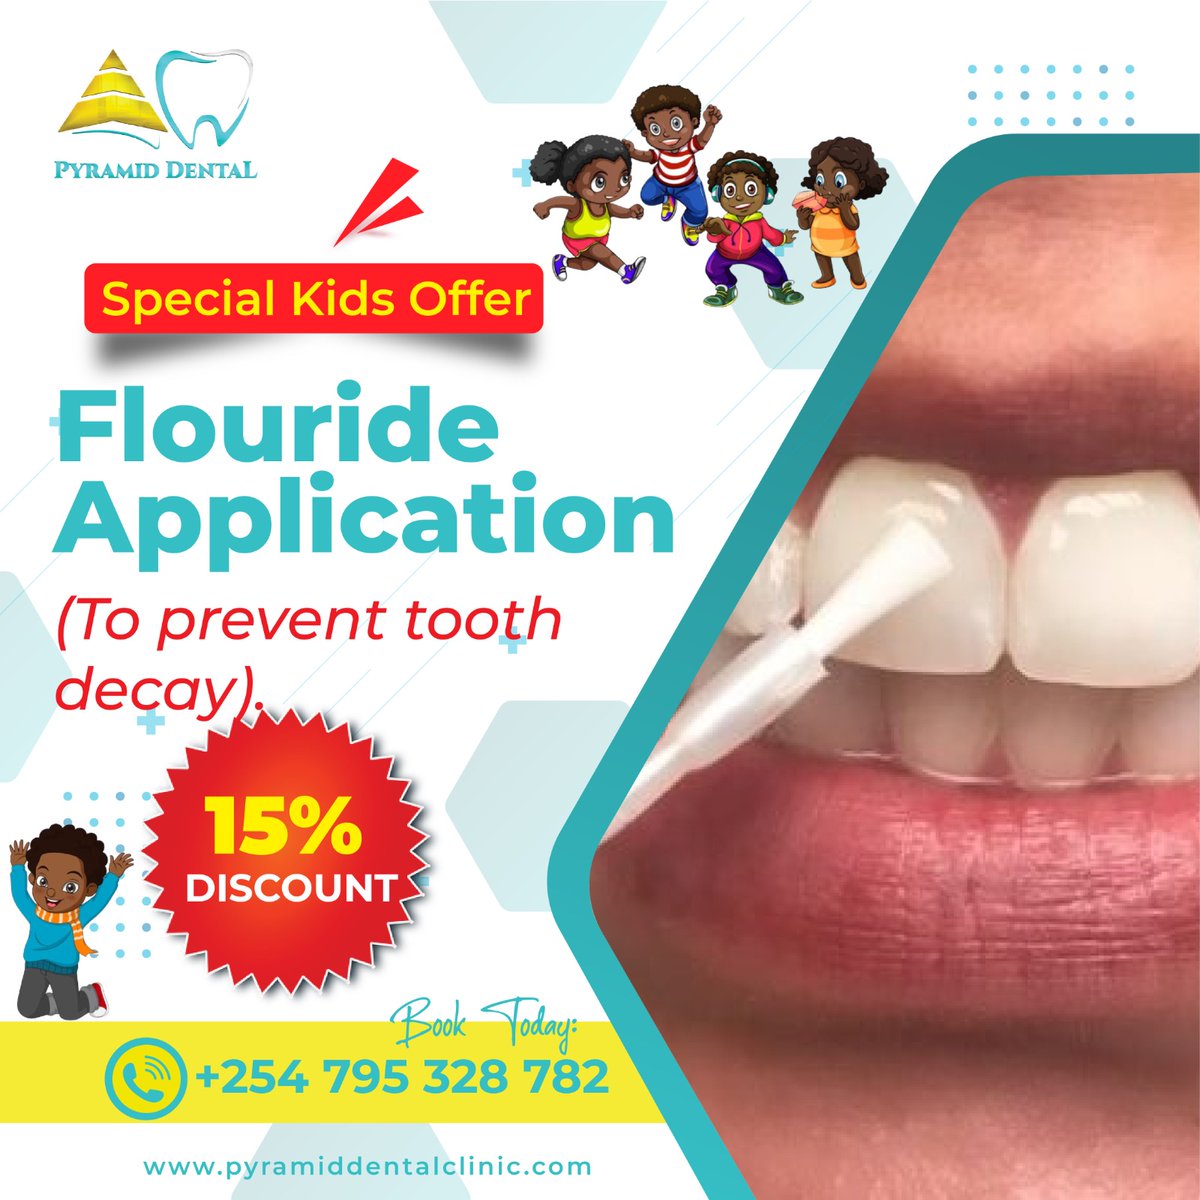 Bright smiles begin with healthy teeth! 😁 Don't miss out on our latest offer for kids: 15% off Fluoride application. Keep those little pearly whites shining bright! Book their appointment today!

#kidsdentalcare #dentalcare #specialoffers #teethcleaning #BreakingNews #Boina